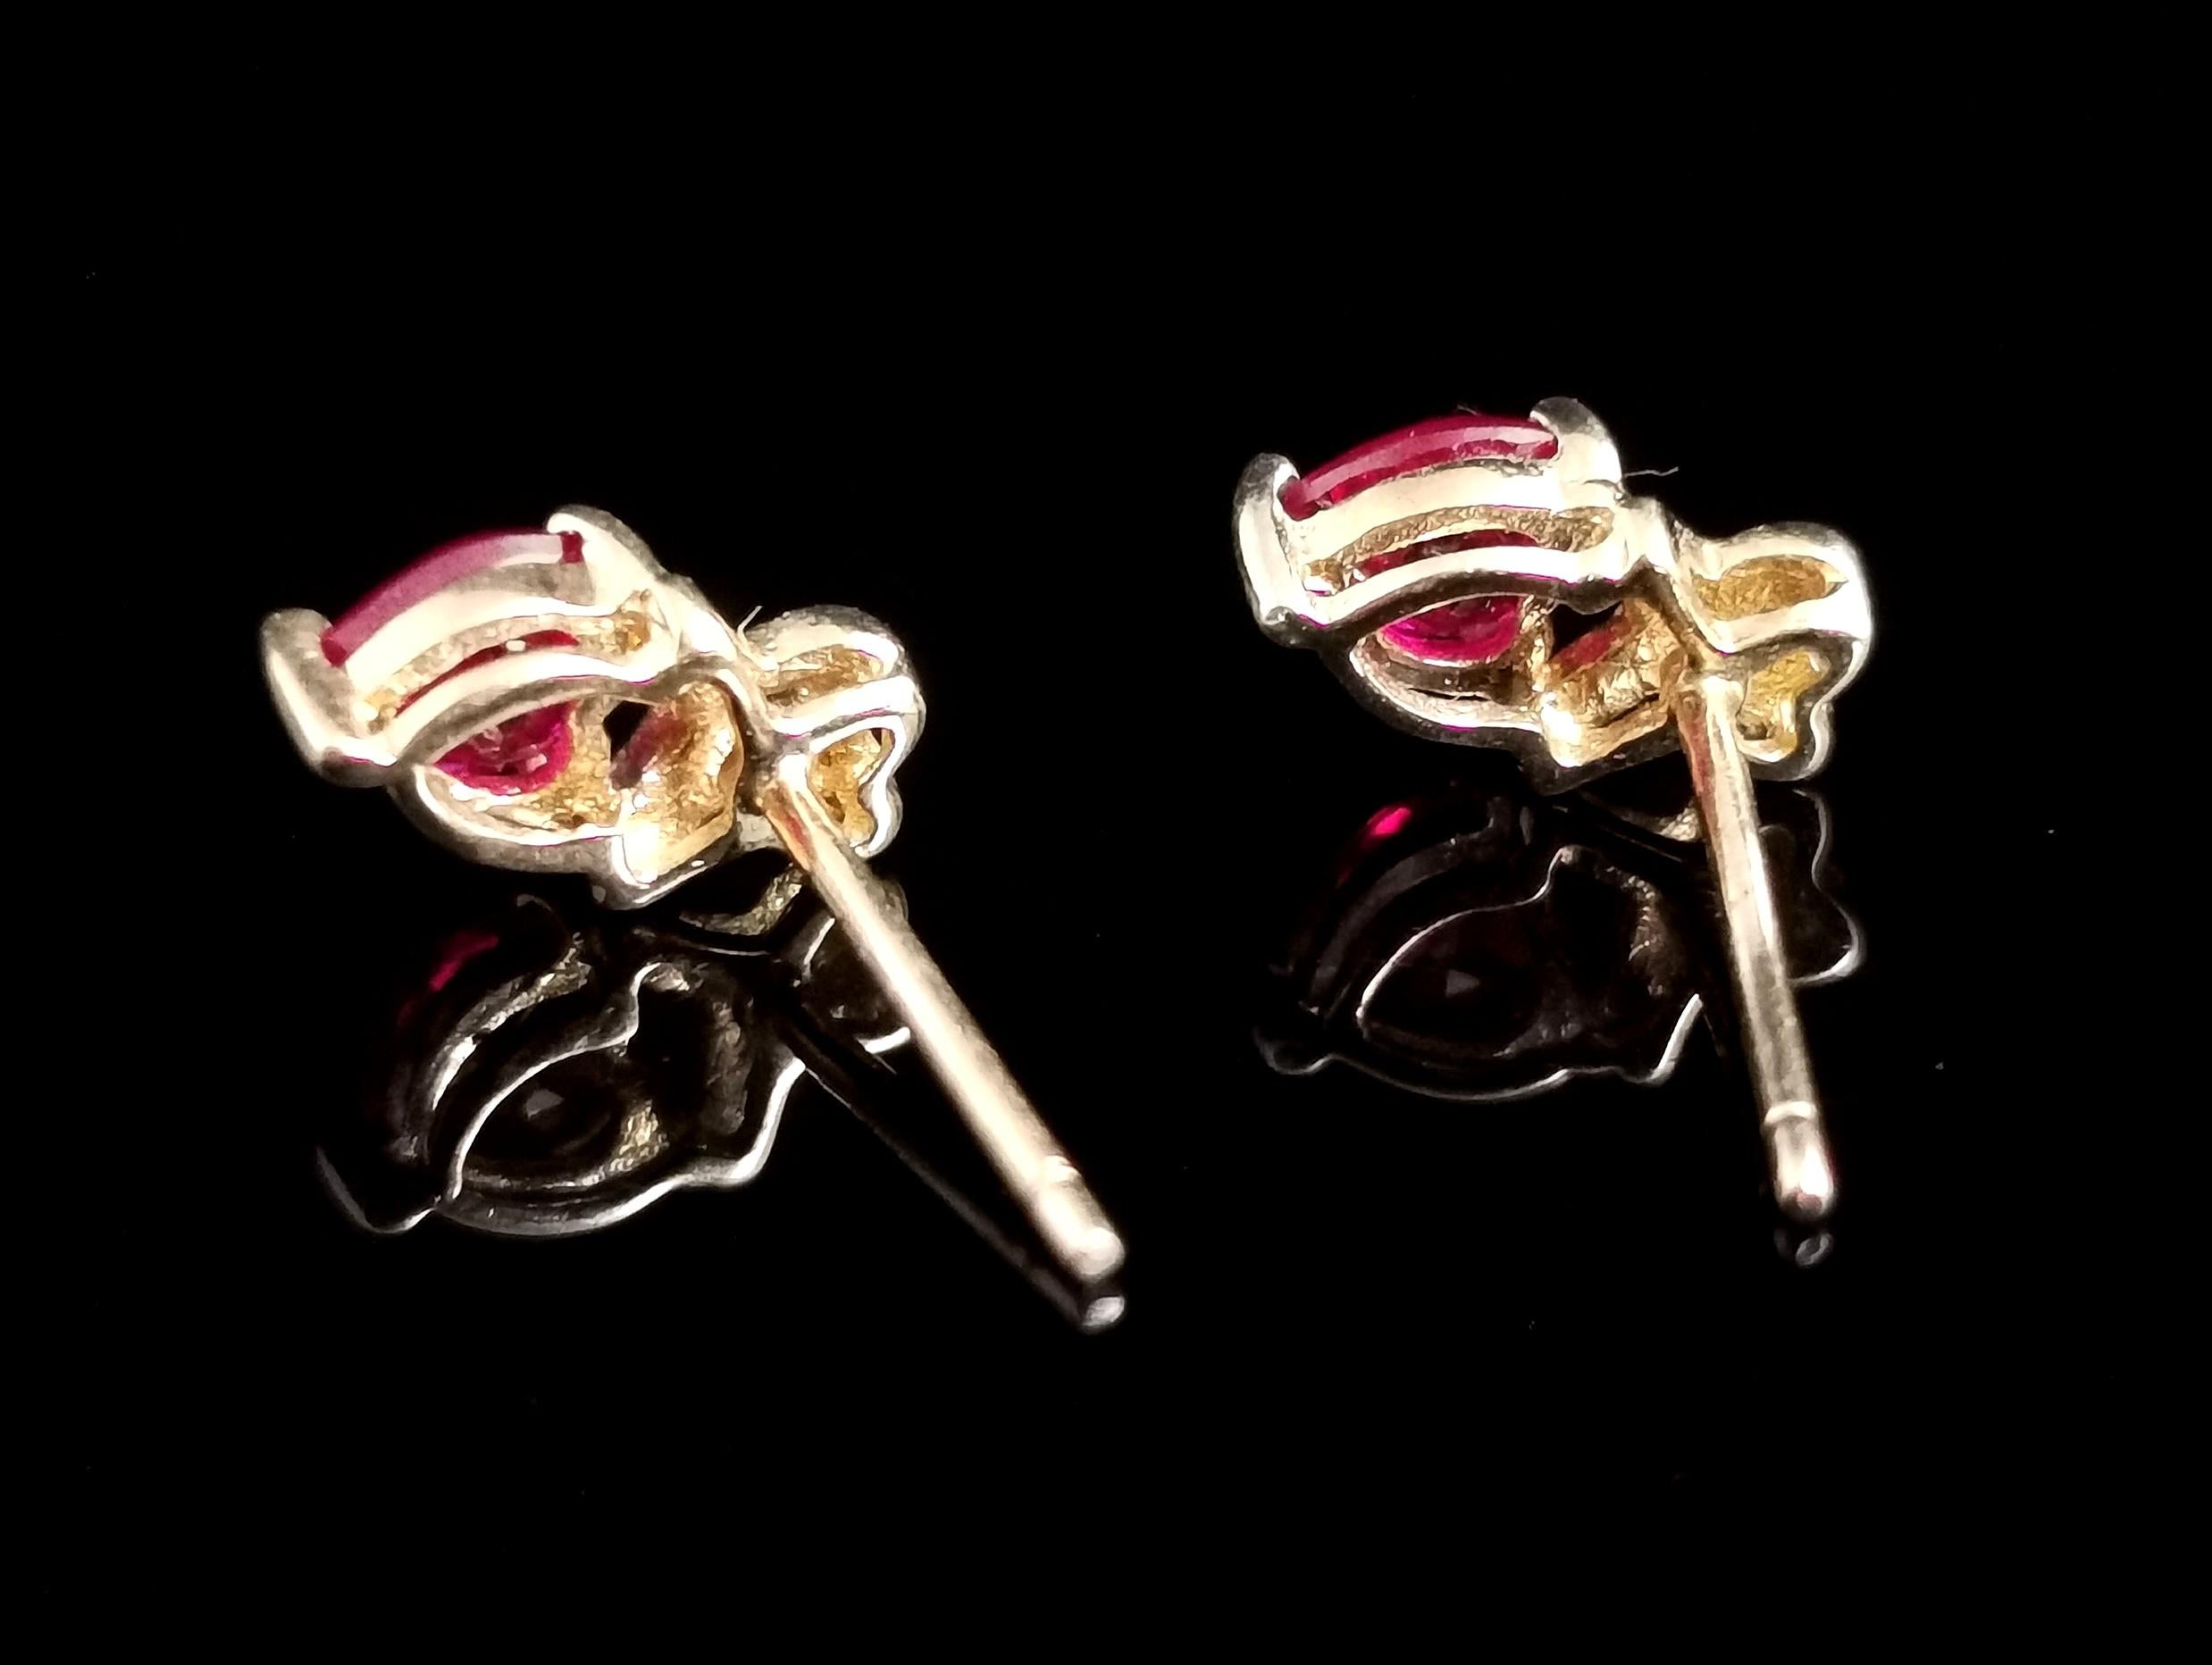 Vintage Synthetic Ruby and Diamond Heart Earrings, Studs, 9 Karat Gold  2